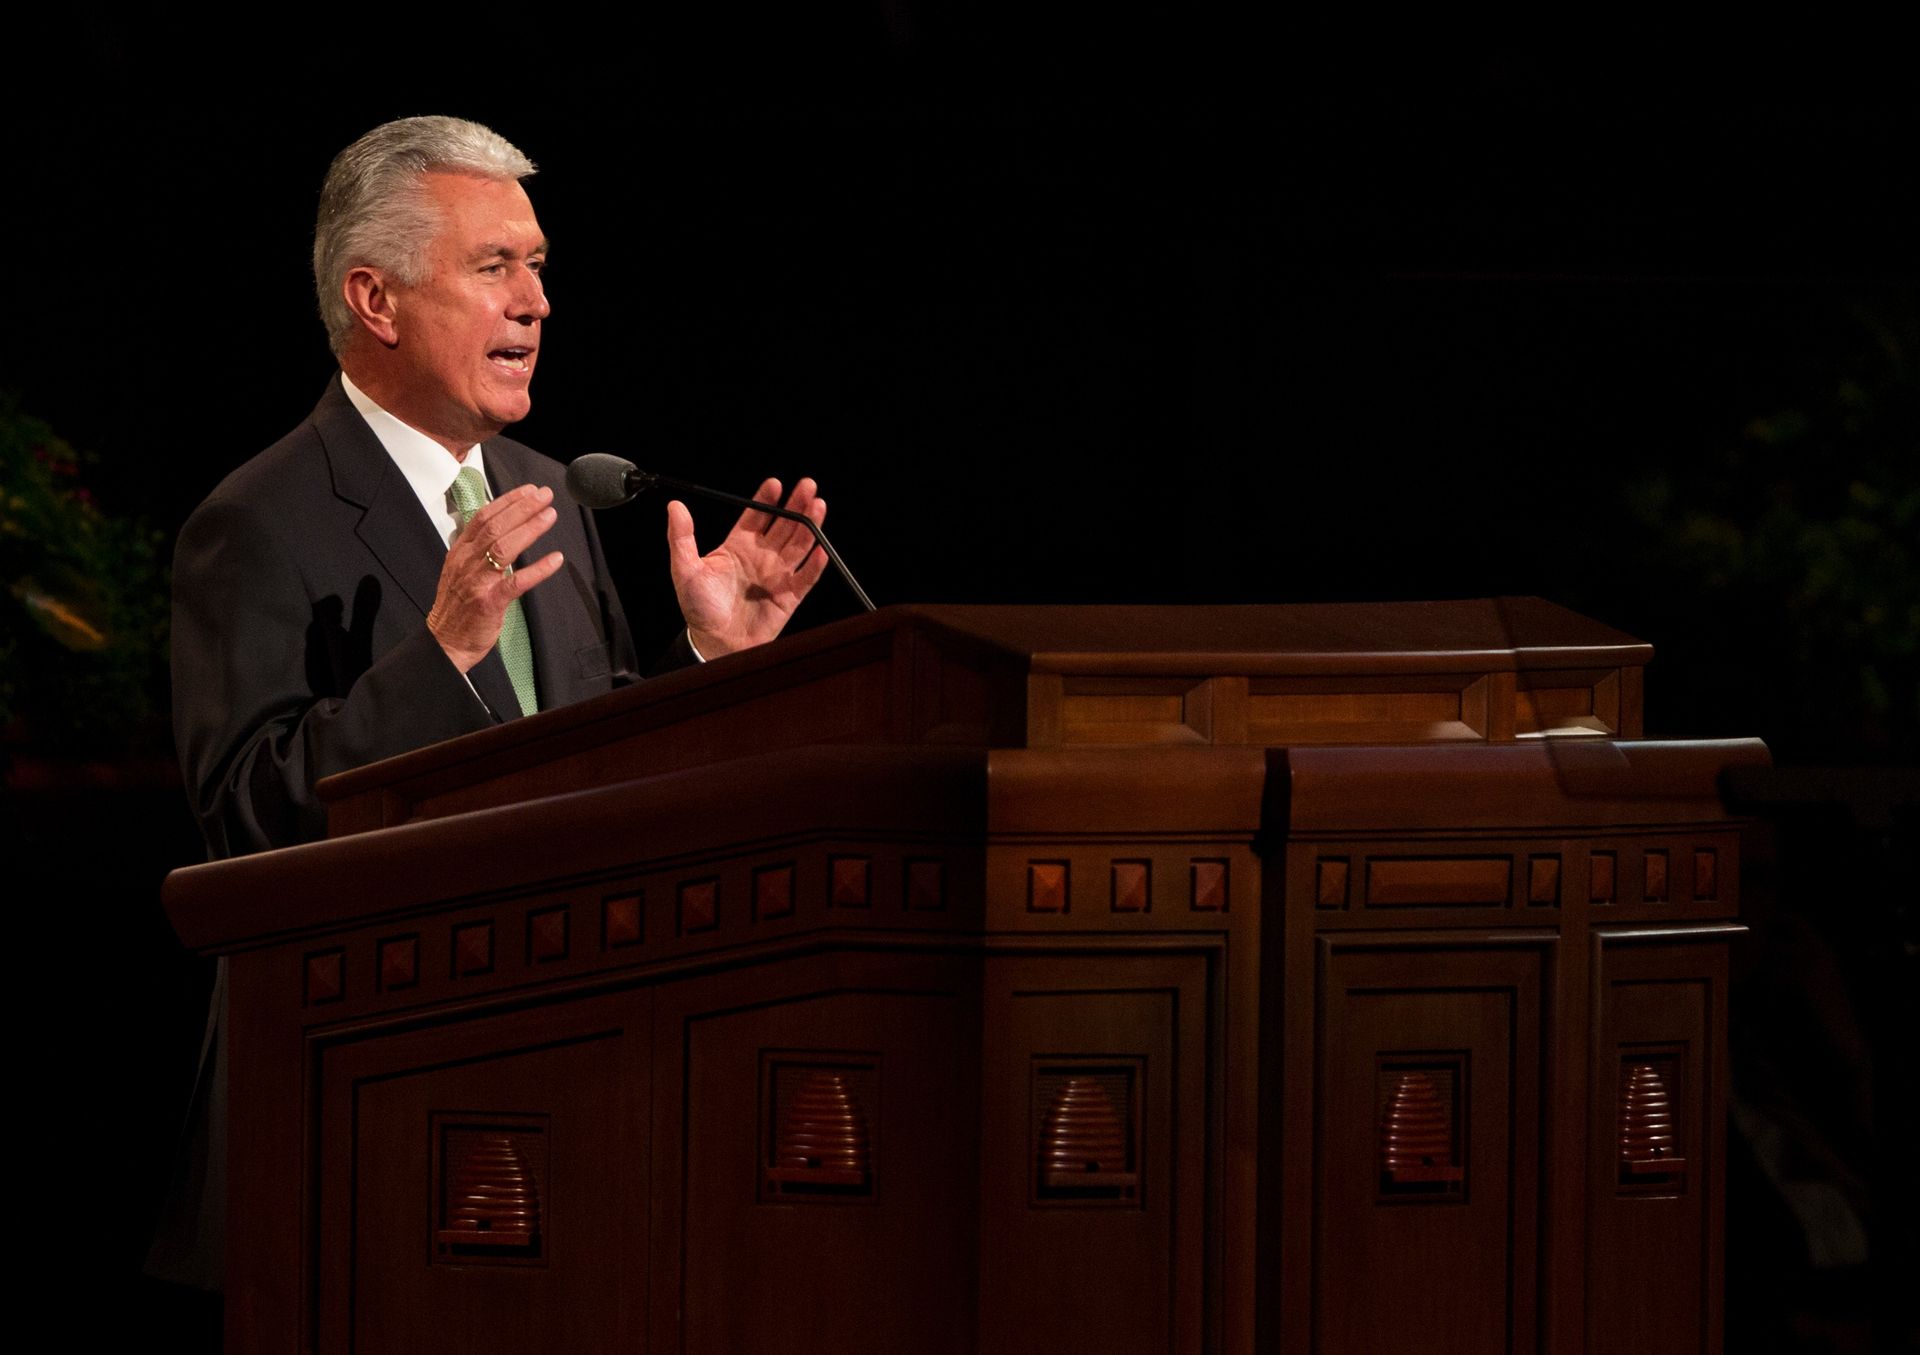 Dieter F. Uchtdorf speaking to the congregation in the Conference Center.